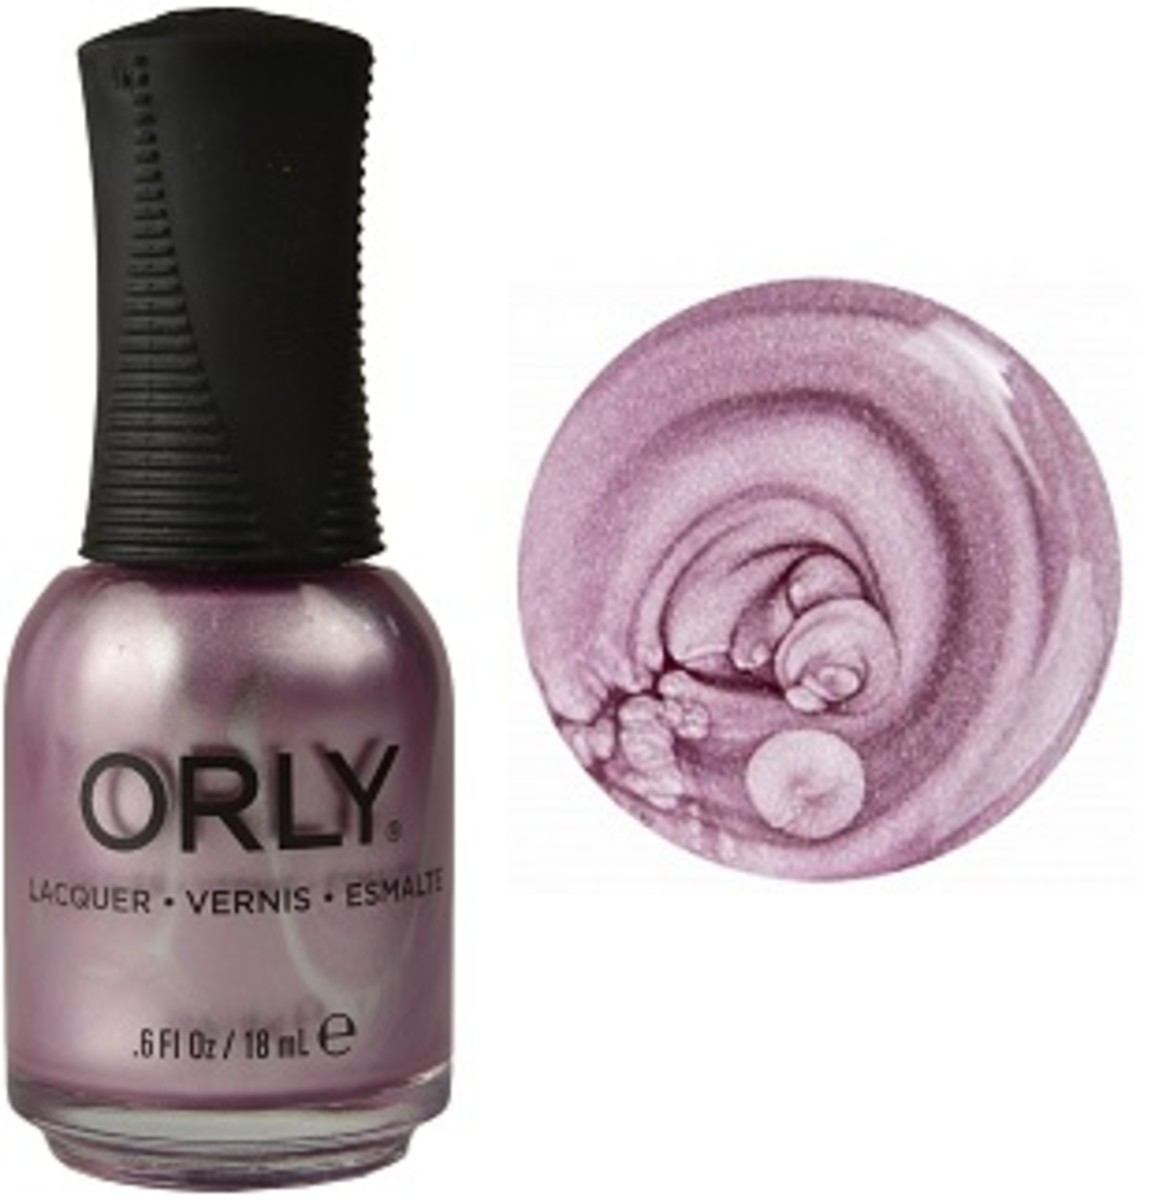 Lilac City - Orly Spring 2018